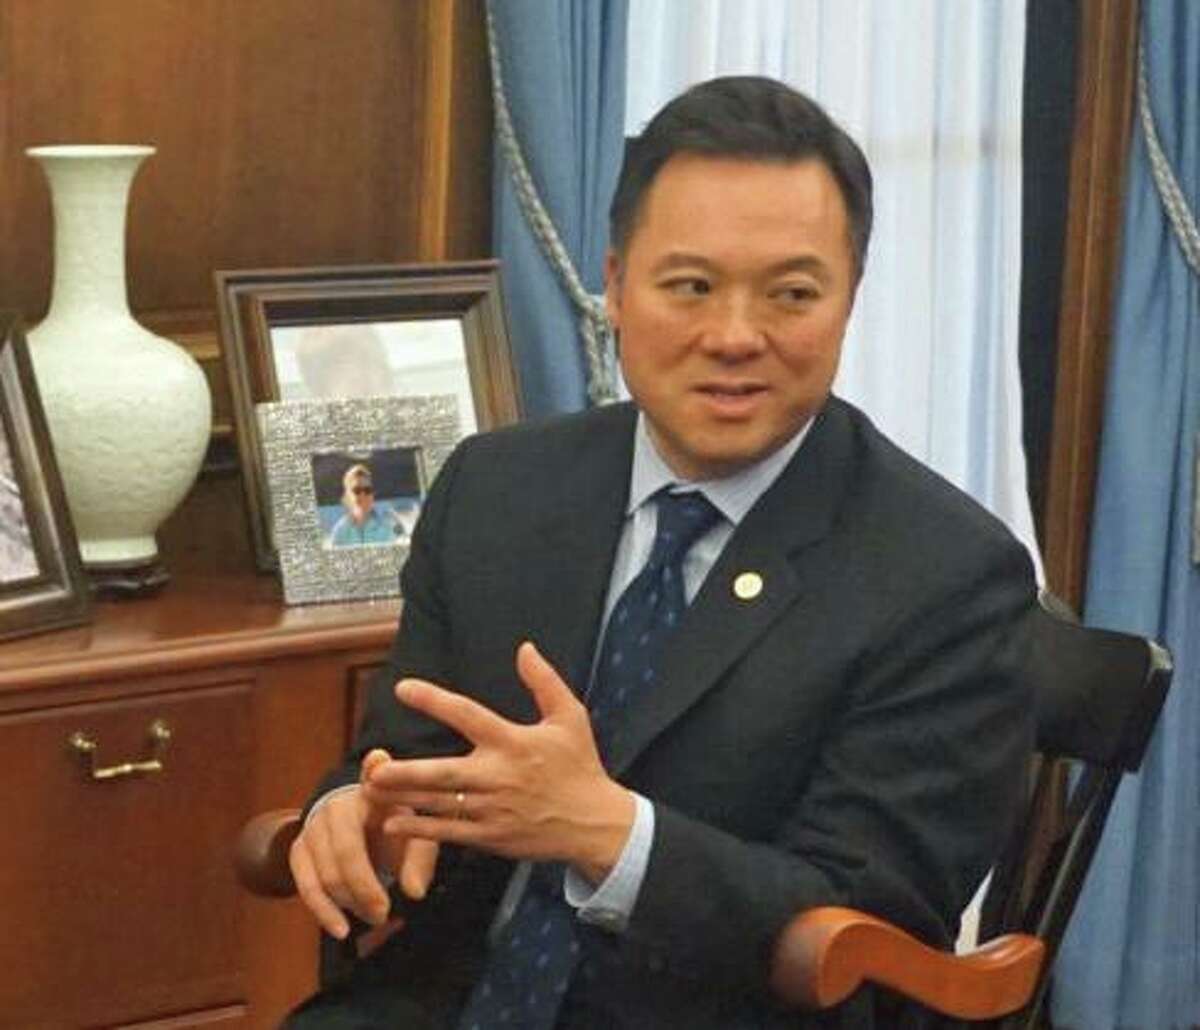 Attorney General William Tong will speak on “Enforcement Actions Against Generic Drug Manufacturers and the Opioid Crisis” on Wednesday before the Greenwich Retired Men’s Association at the First Presbyterian Church, 1 W. Putnam Ave. The free program is open to the public; no reservations required. Social break starts at 10:40 a.m., followed by the speaker at 11 a.m.